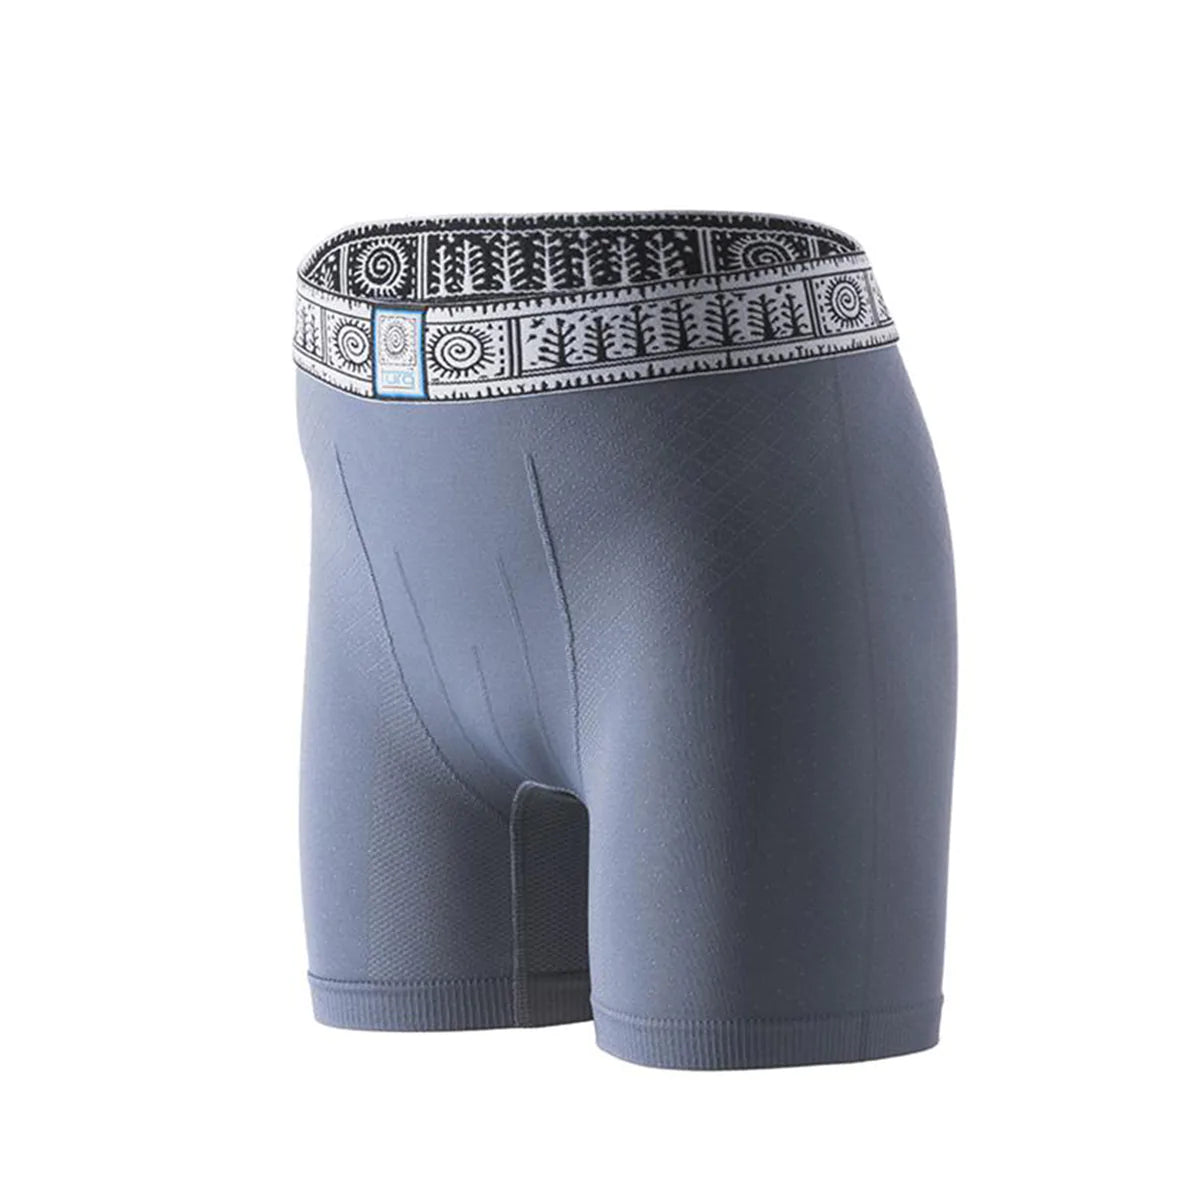 TURQ boxer briefs in grey with a detailed native design waistband and emblem